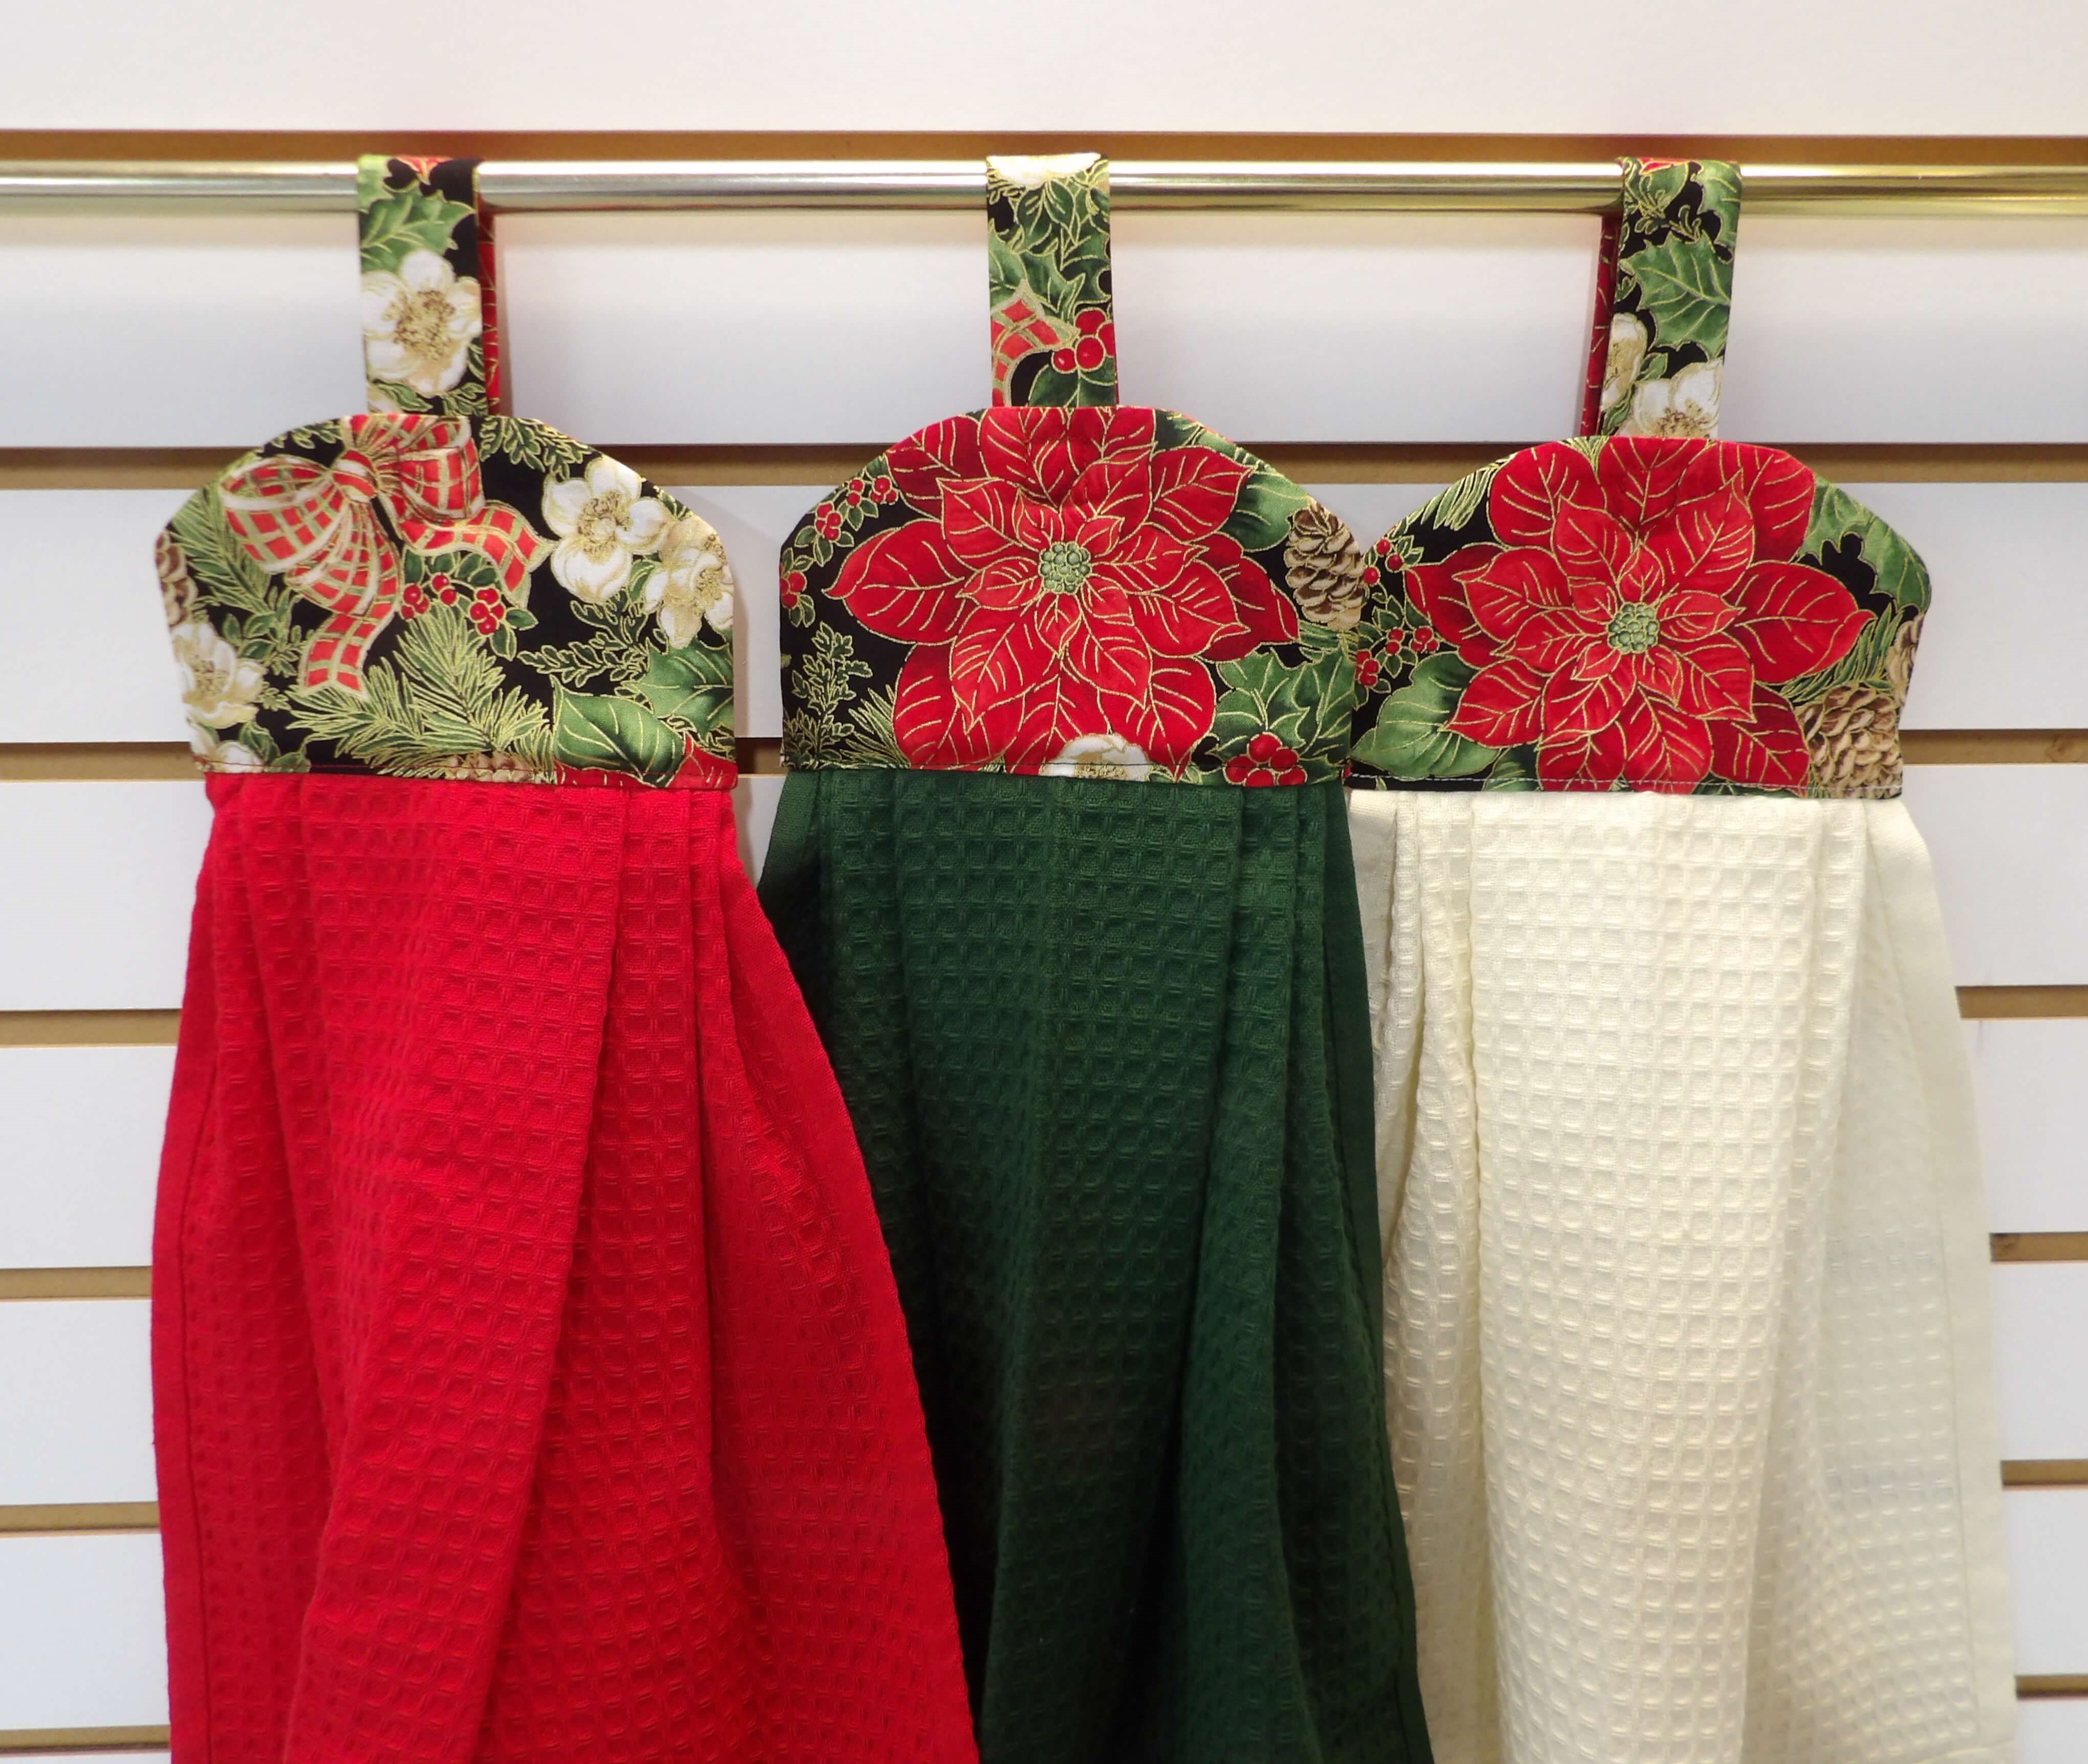 Red Poinsettia Hanging Towel With Holder, Holly Berry Bathroom Hanging Loop Hand  Towels With Snap, Pretty Hand & Dish Hanging Kitchen Towel 